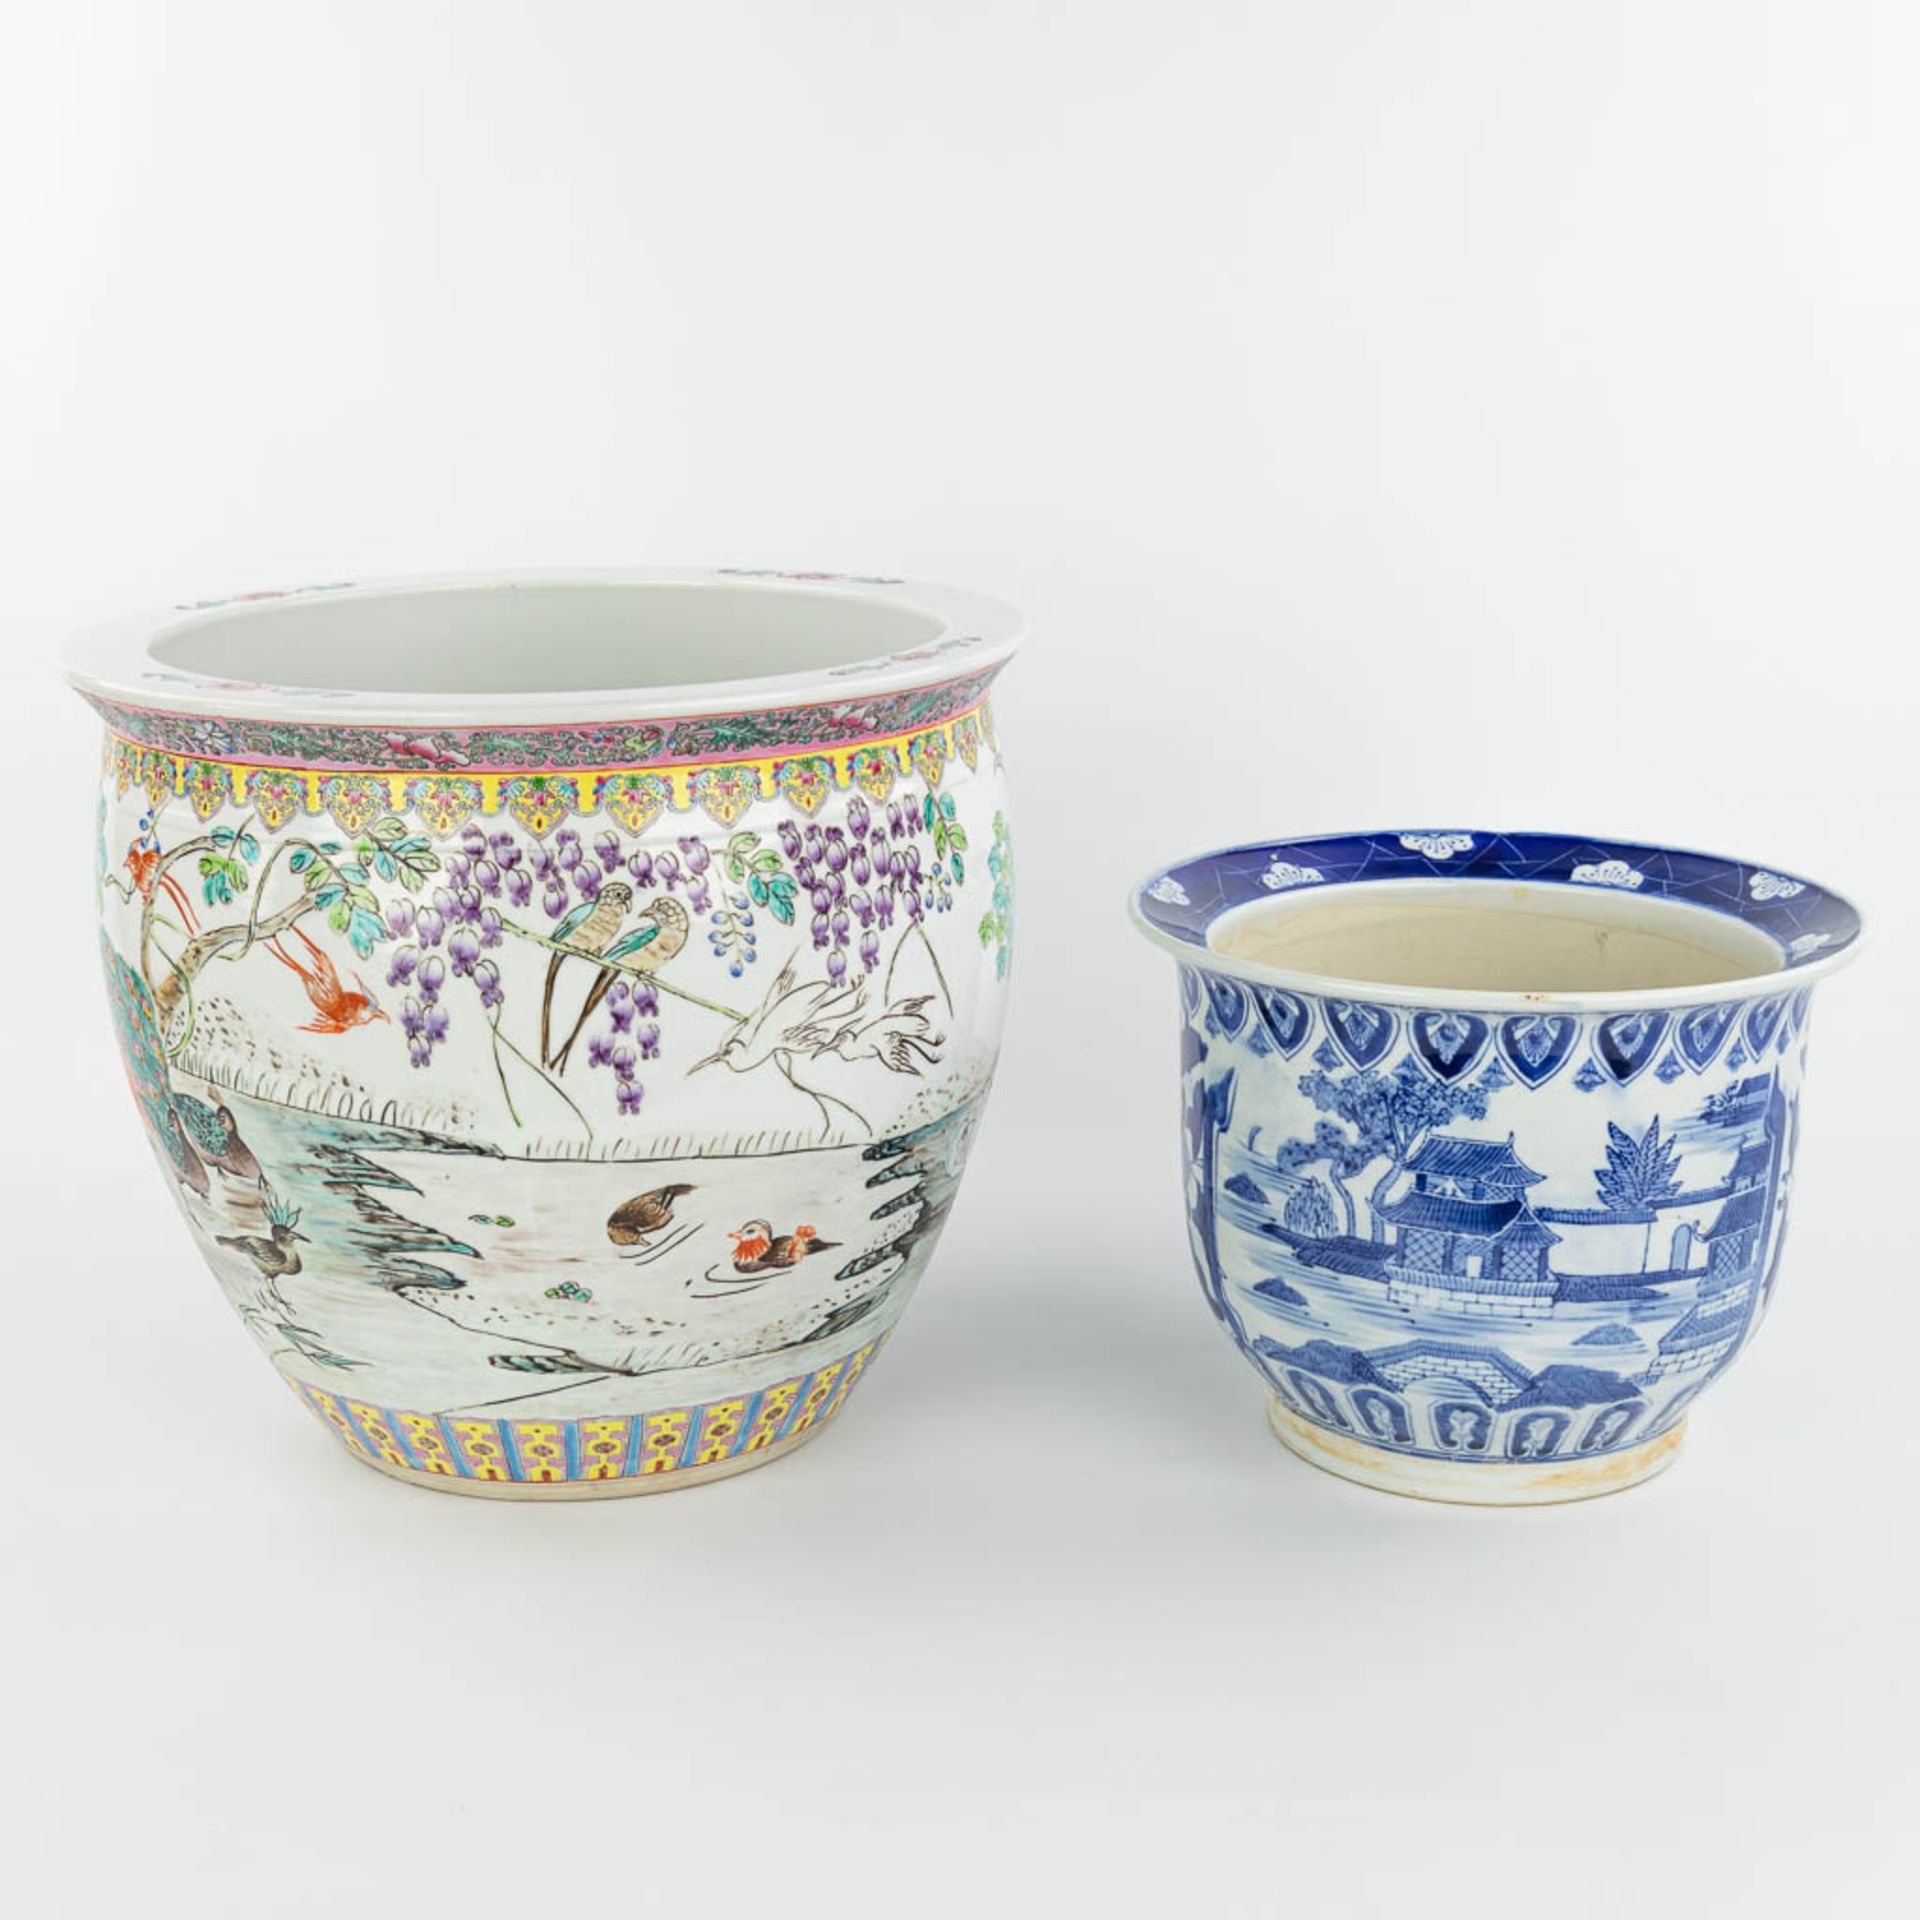 A set of 2 Chinese cache-pots made of porcelain of which 1 has a blue-white decor and the other a de - Image 8 of 15